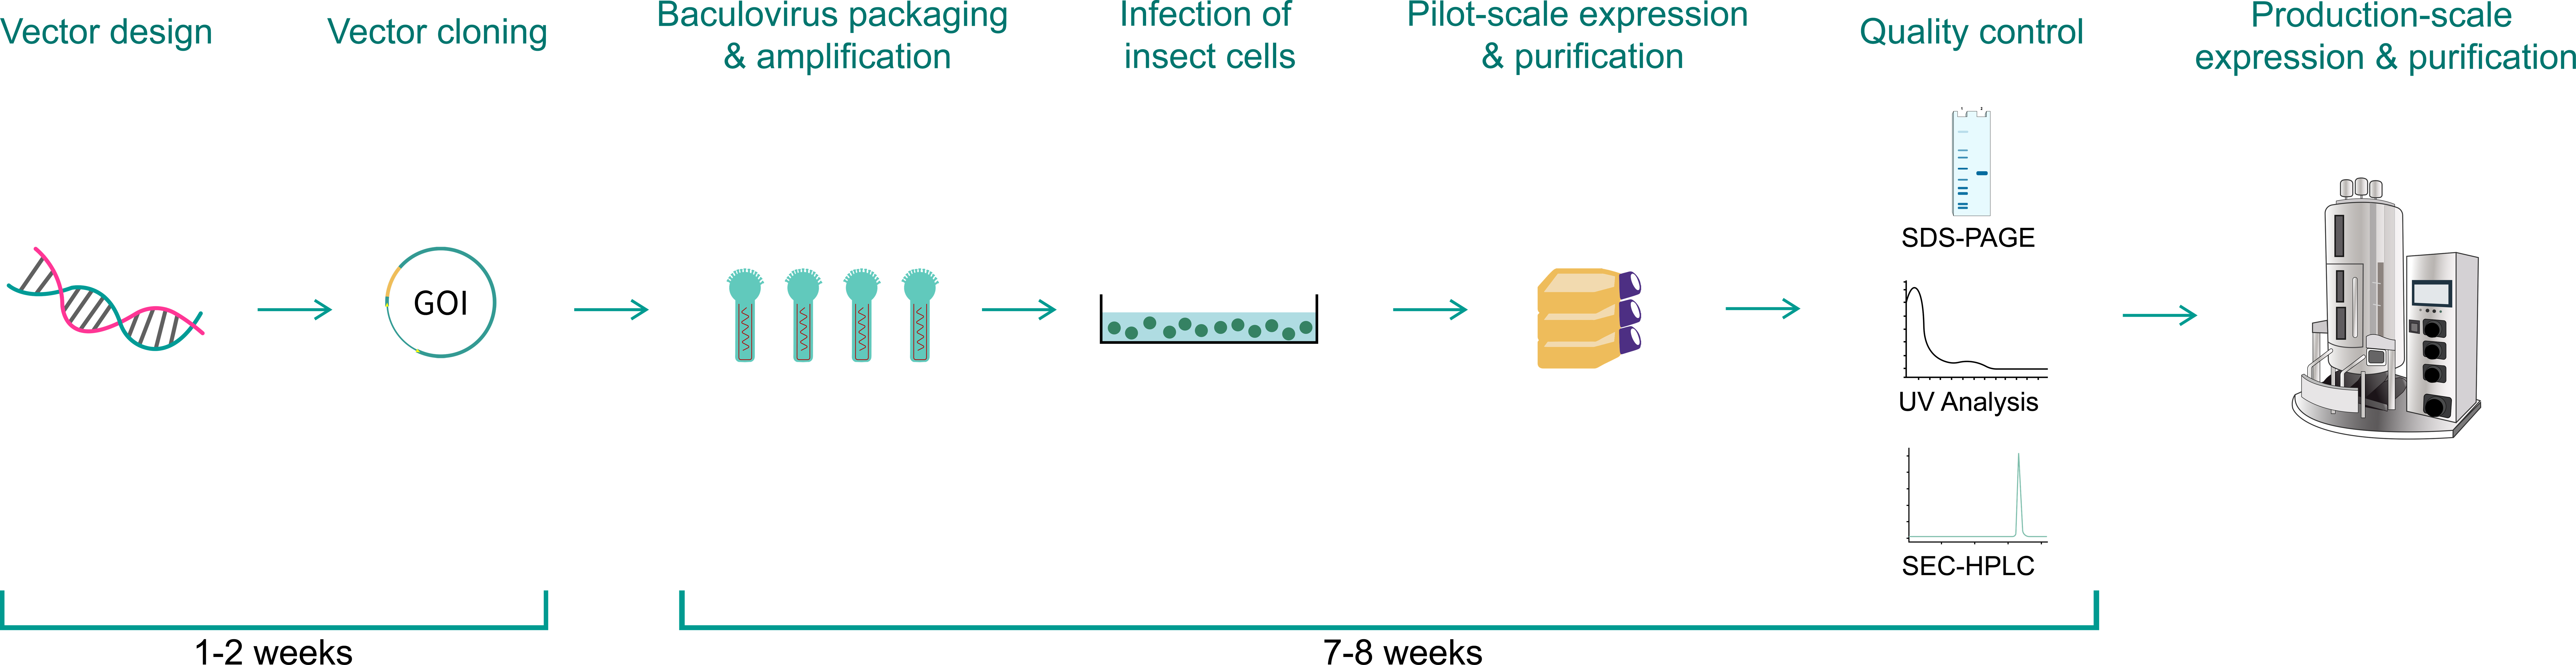 Insect cell protein expression workflow